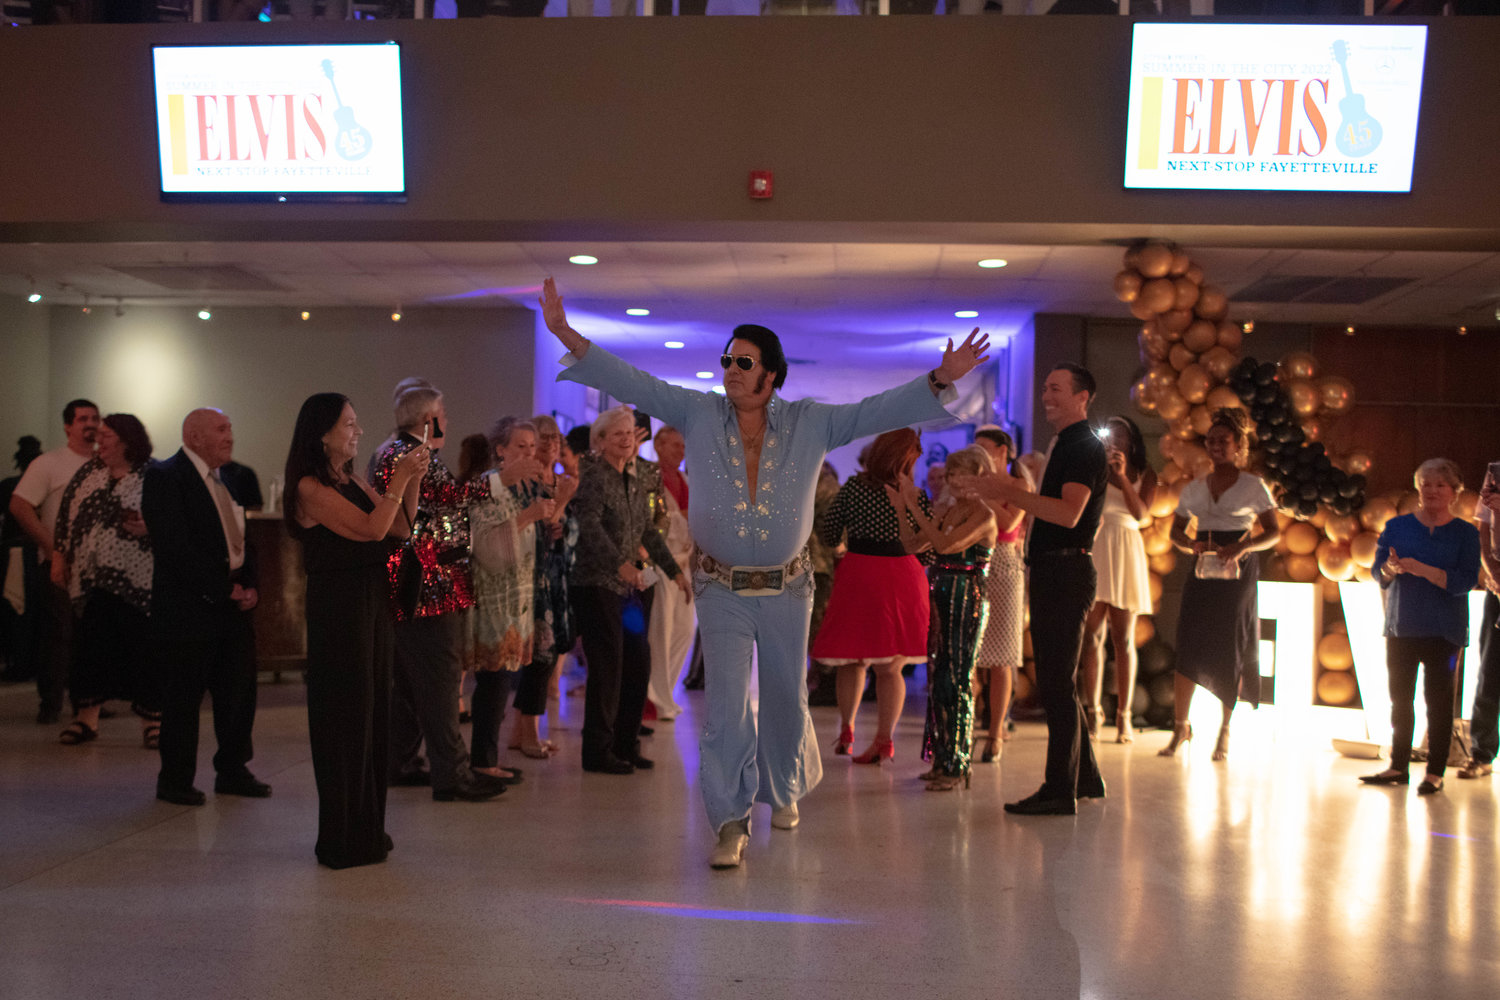 Elvis tribute artist David Chaney makes an entrance before performing.